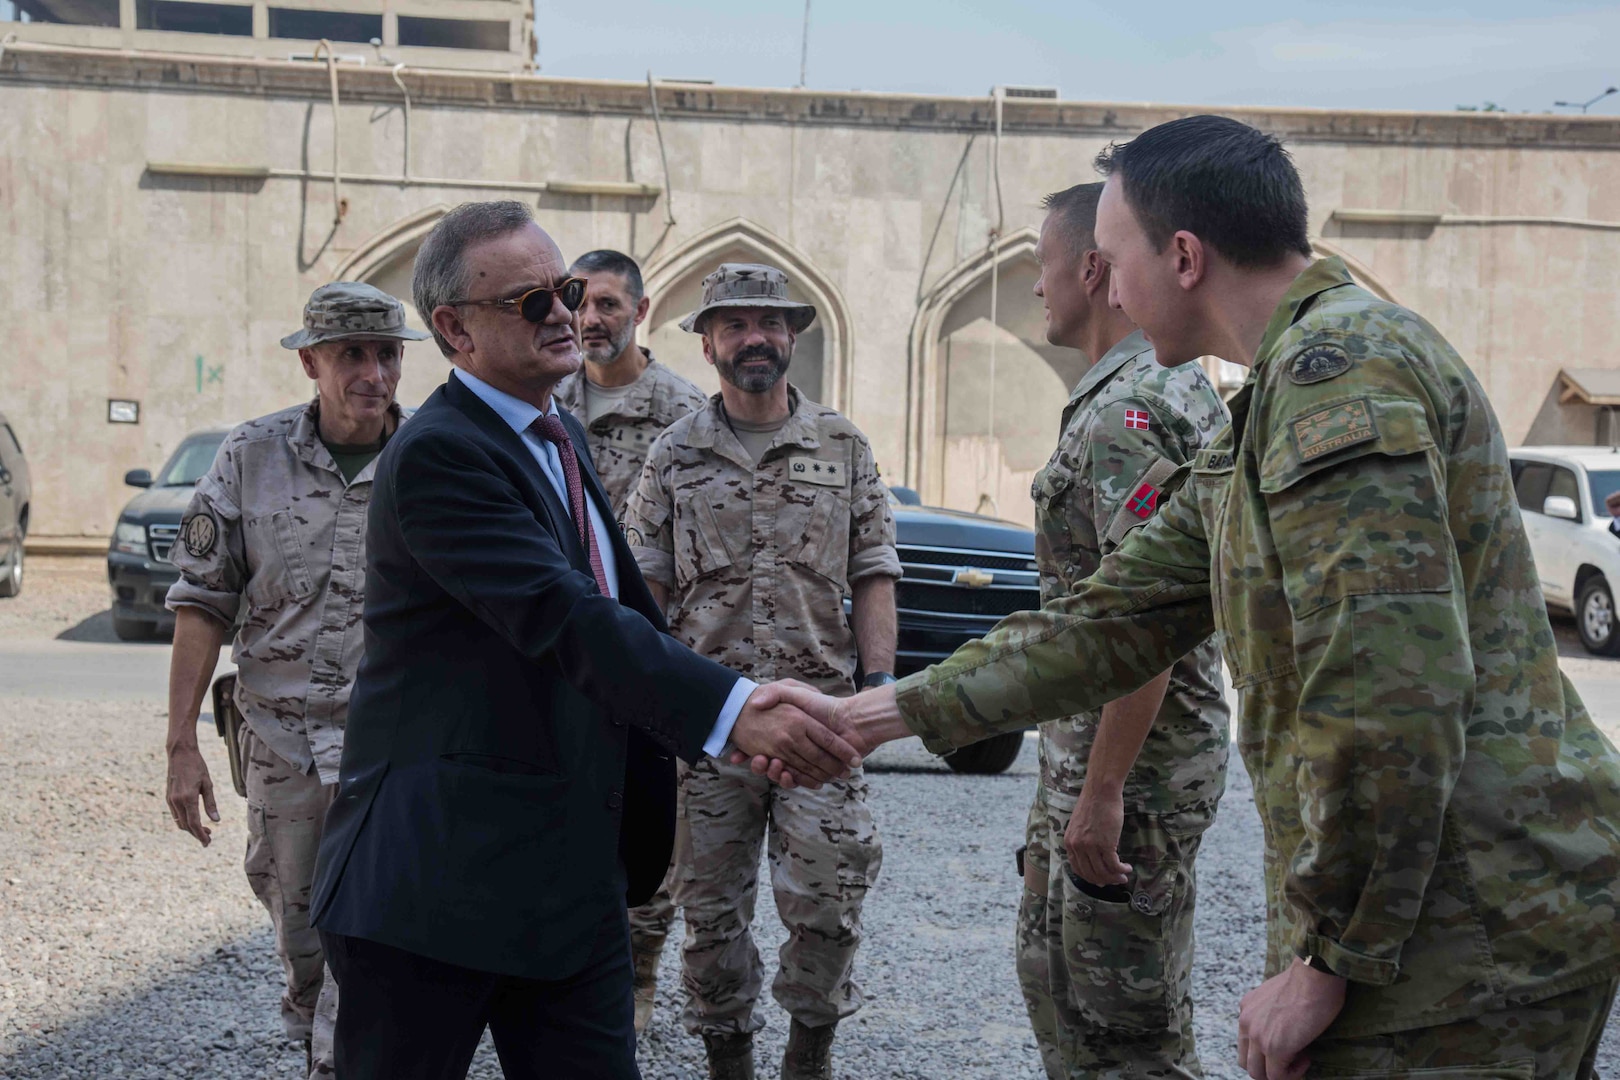 Ambassadors of different nations are greeted by members of the Combined Joint Task Force- Operation Inherent Resolve (CJTF-OIR) on Ambassador's Day on Union 3, Iraq, June 4, 2019. Key members of CJTF-OIR arranged the day in order to talk to ambassador's of the coalition's nations on the progress of the partnership established by CJTF-OIR and the population of Iraq. The Coalition continually reviews its force levels in Iraq in order to achieve the job that has been requested of us by the Government of Iraq. (Portions of this image have been blurred to protect operational security) (U.S Army Photo by Spc. Adrian Pacheco)